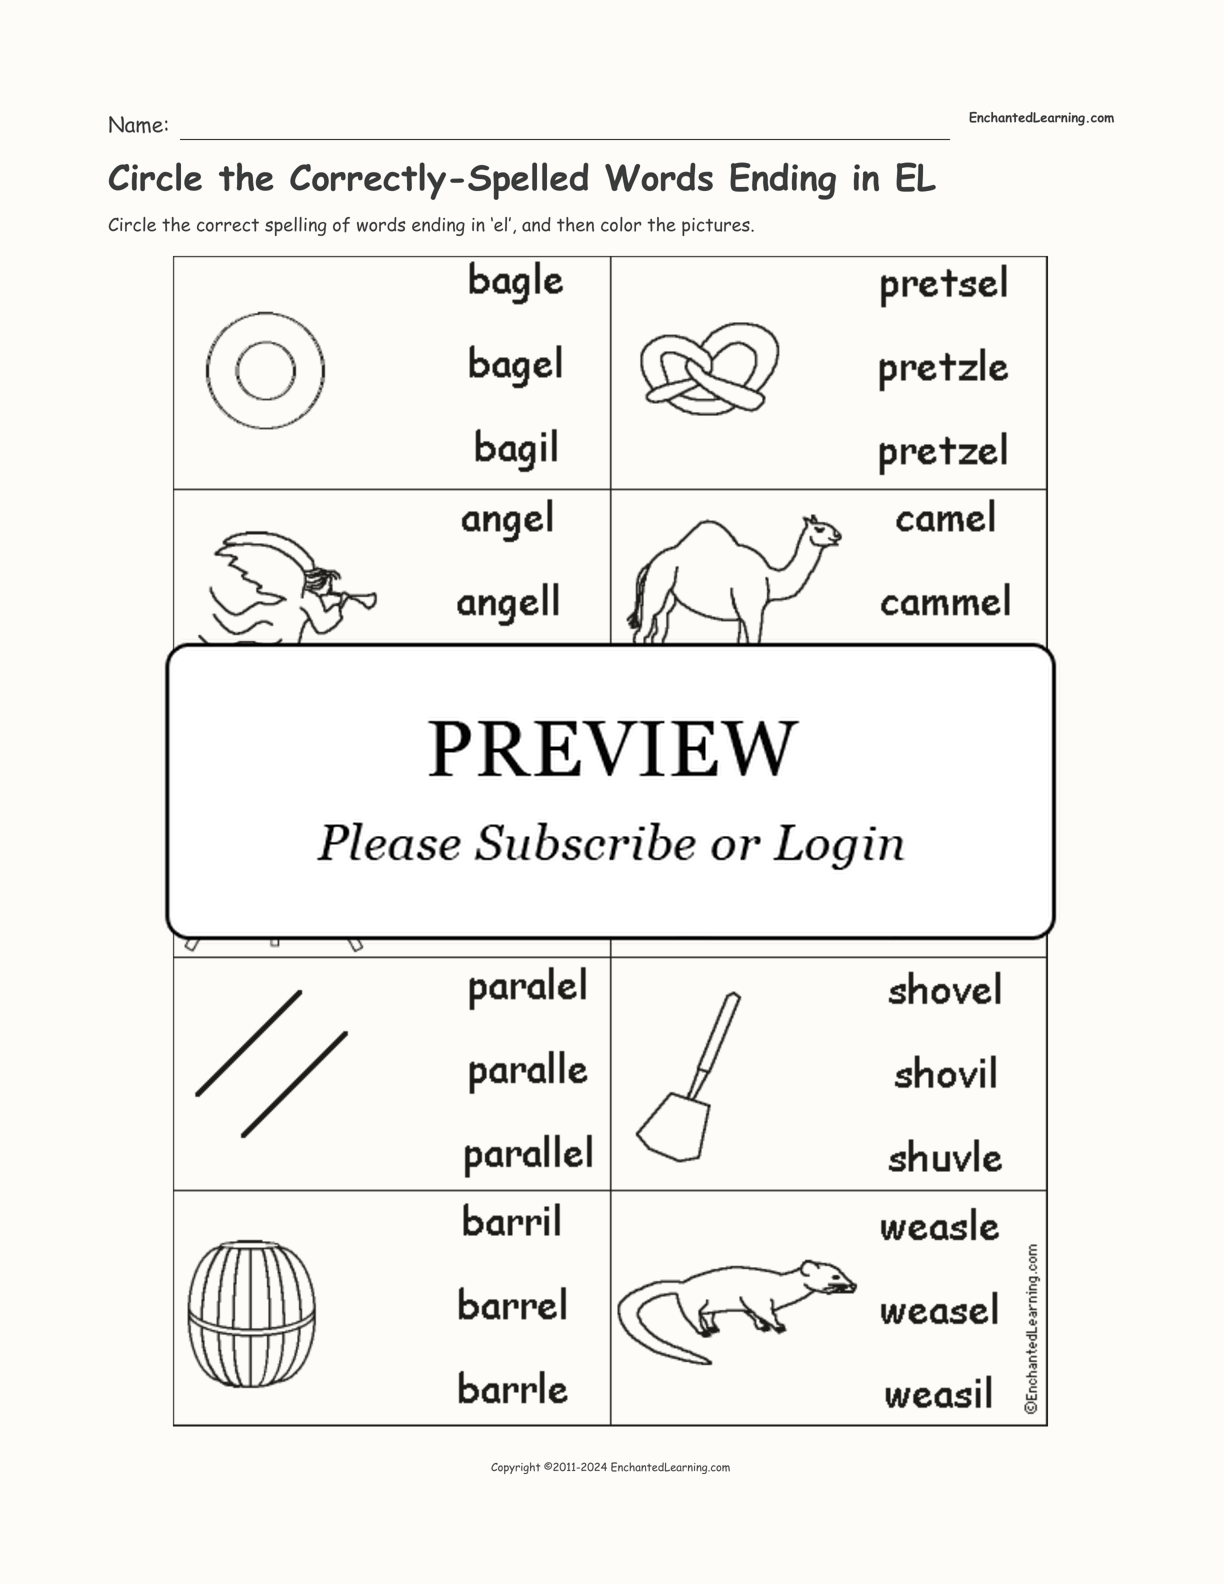 Circle the Correctly-Spelled Words Ending in EL interactive worksheet page 1